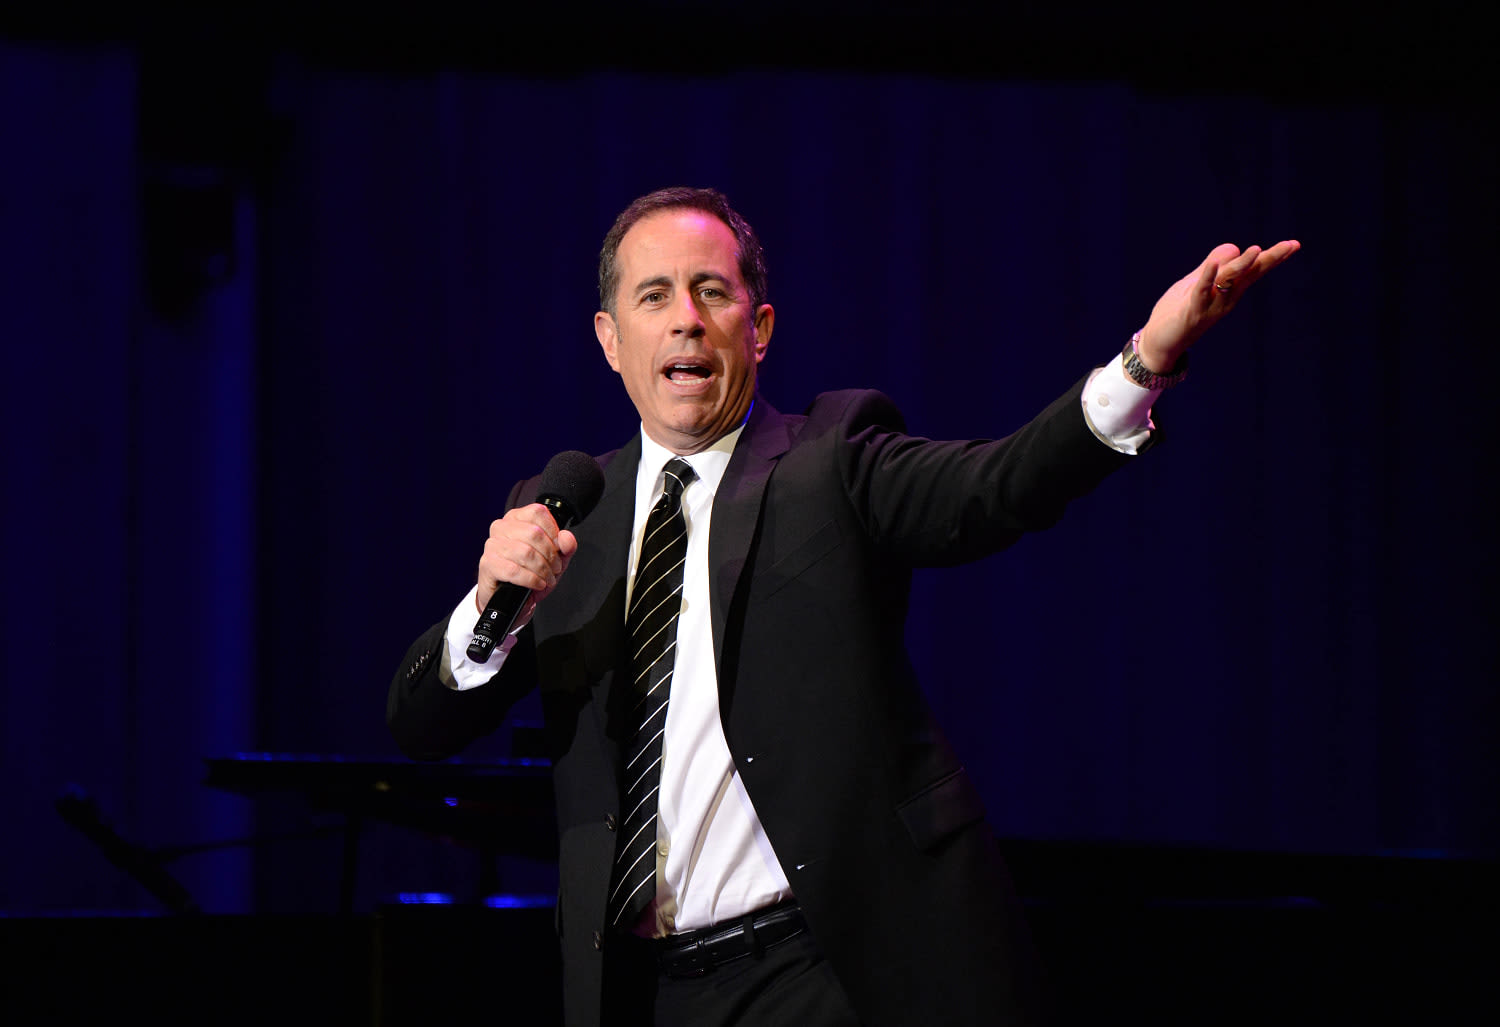 Jerry Seinfeld says the ‘extreme left’ has ruined sitcoms with ‘PC crap’